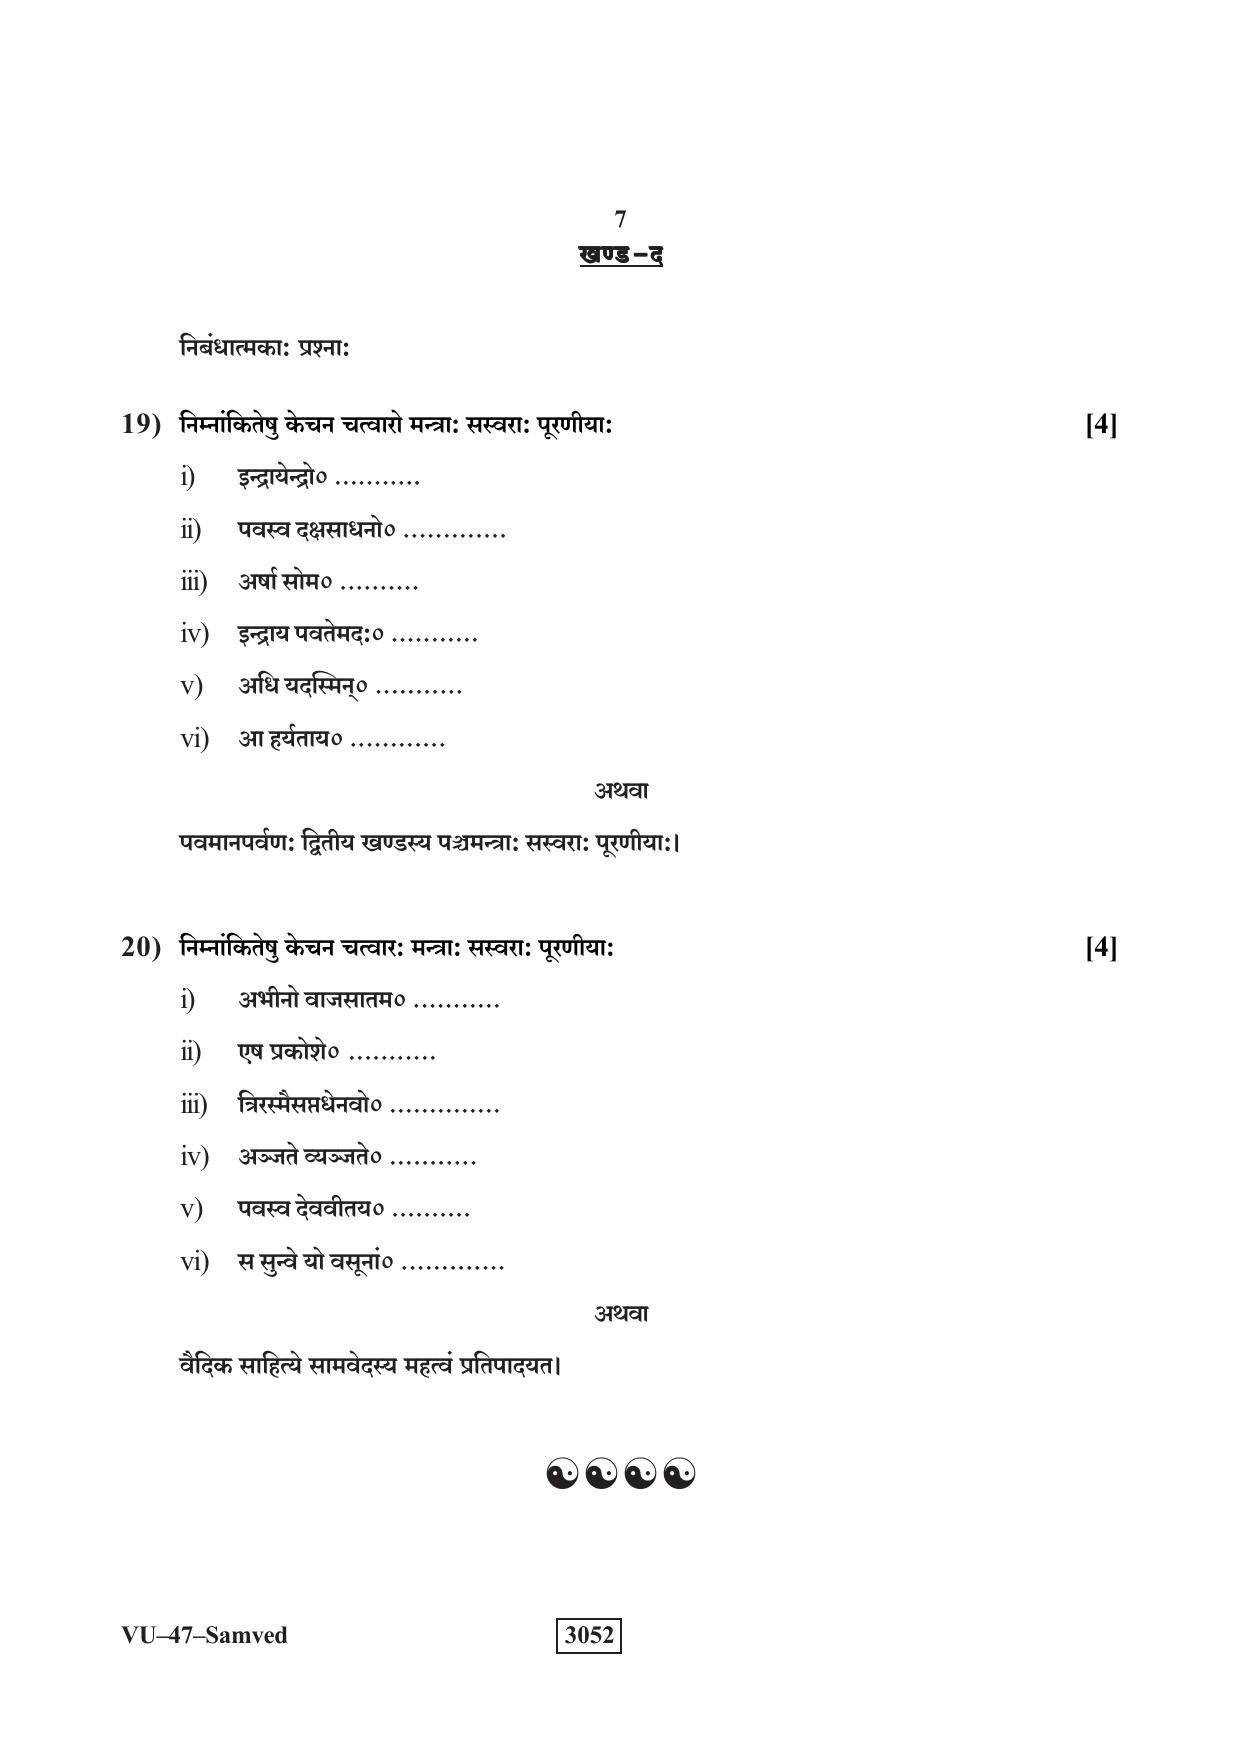 RBSE 2023 Samved Varishtha Upadhyay Question Paper - Page 7